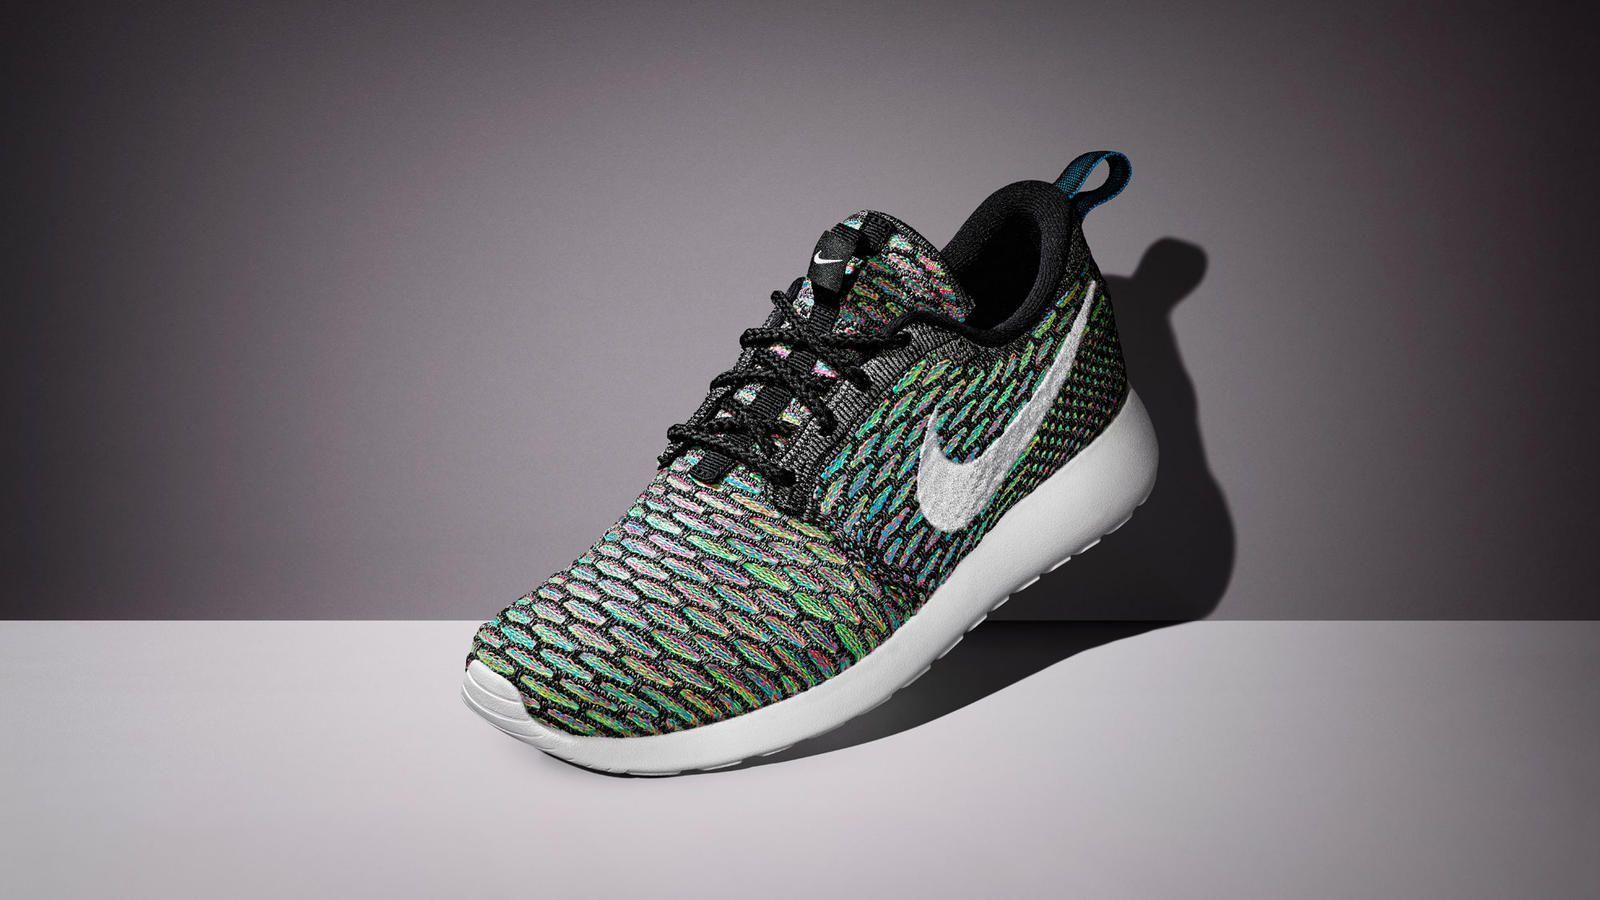 More With Less: The Nike Roshe Flyknit